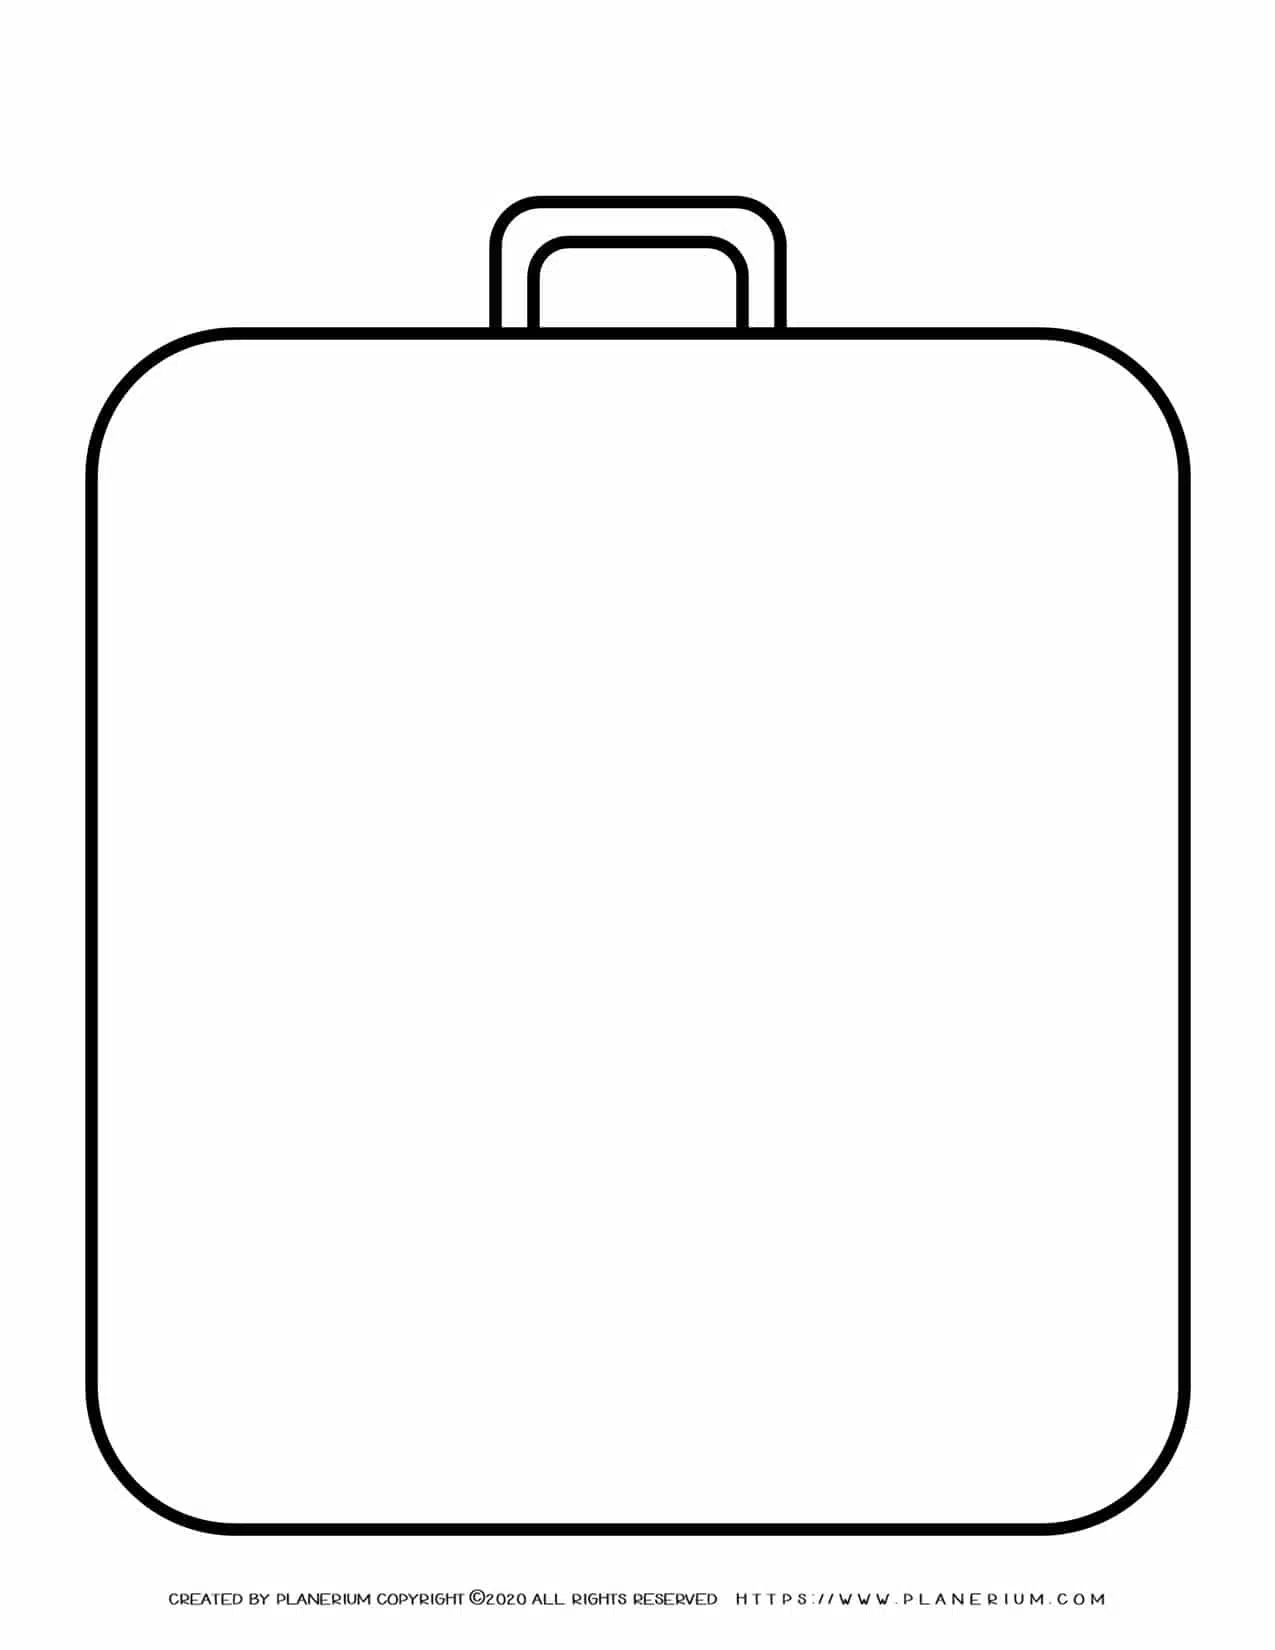 Templates - Big Suitcase outline  Planerium Within Blank Suitcase Template